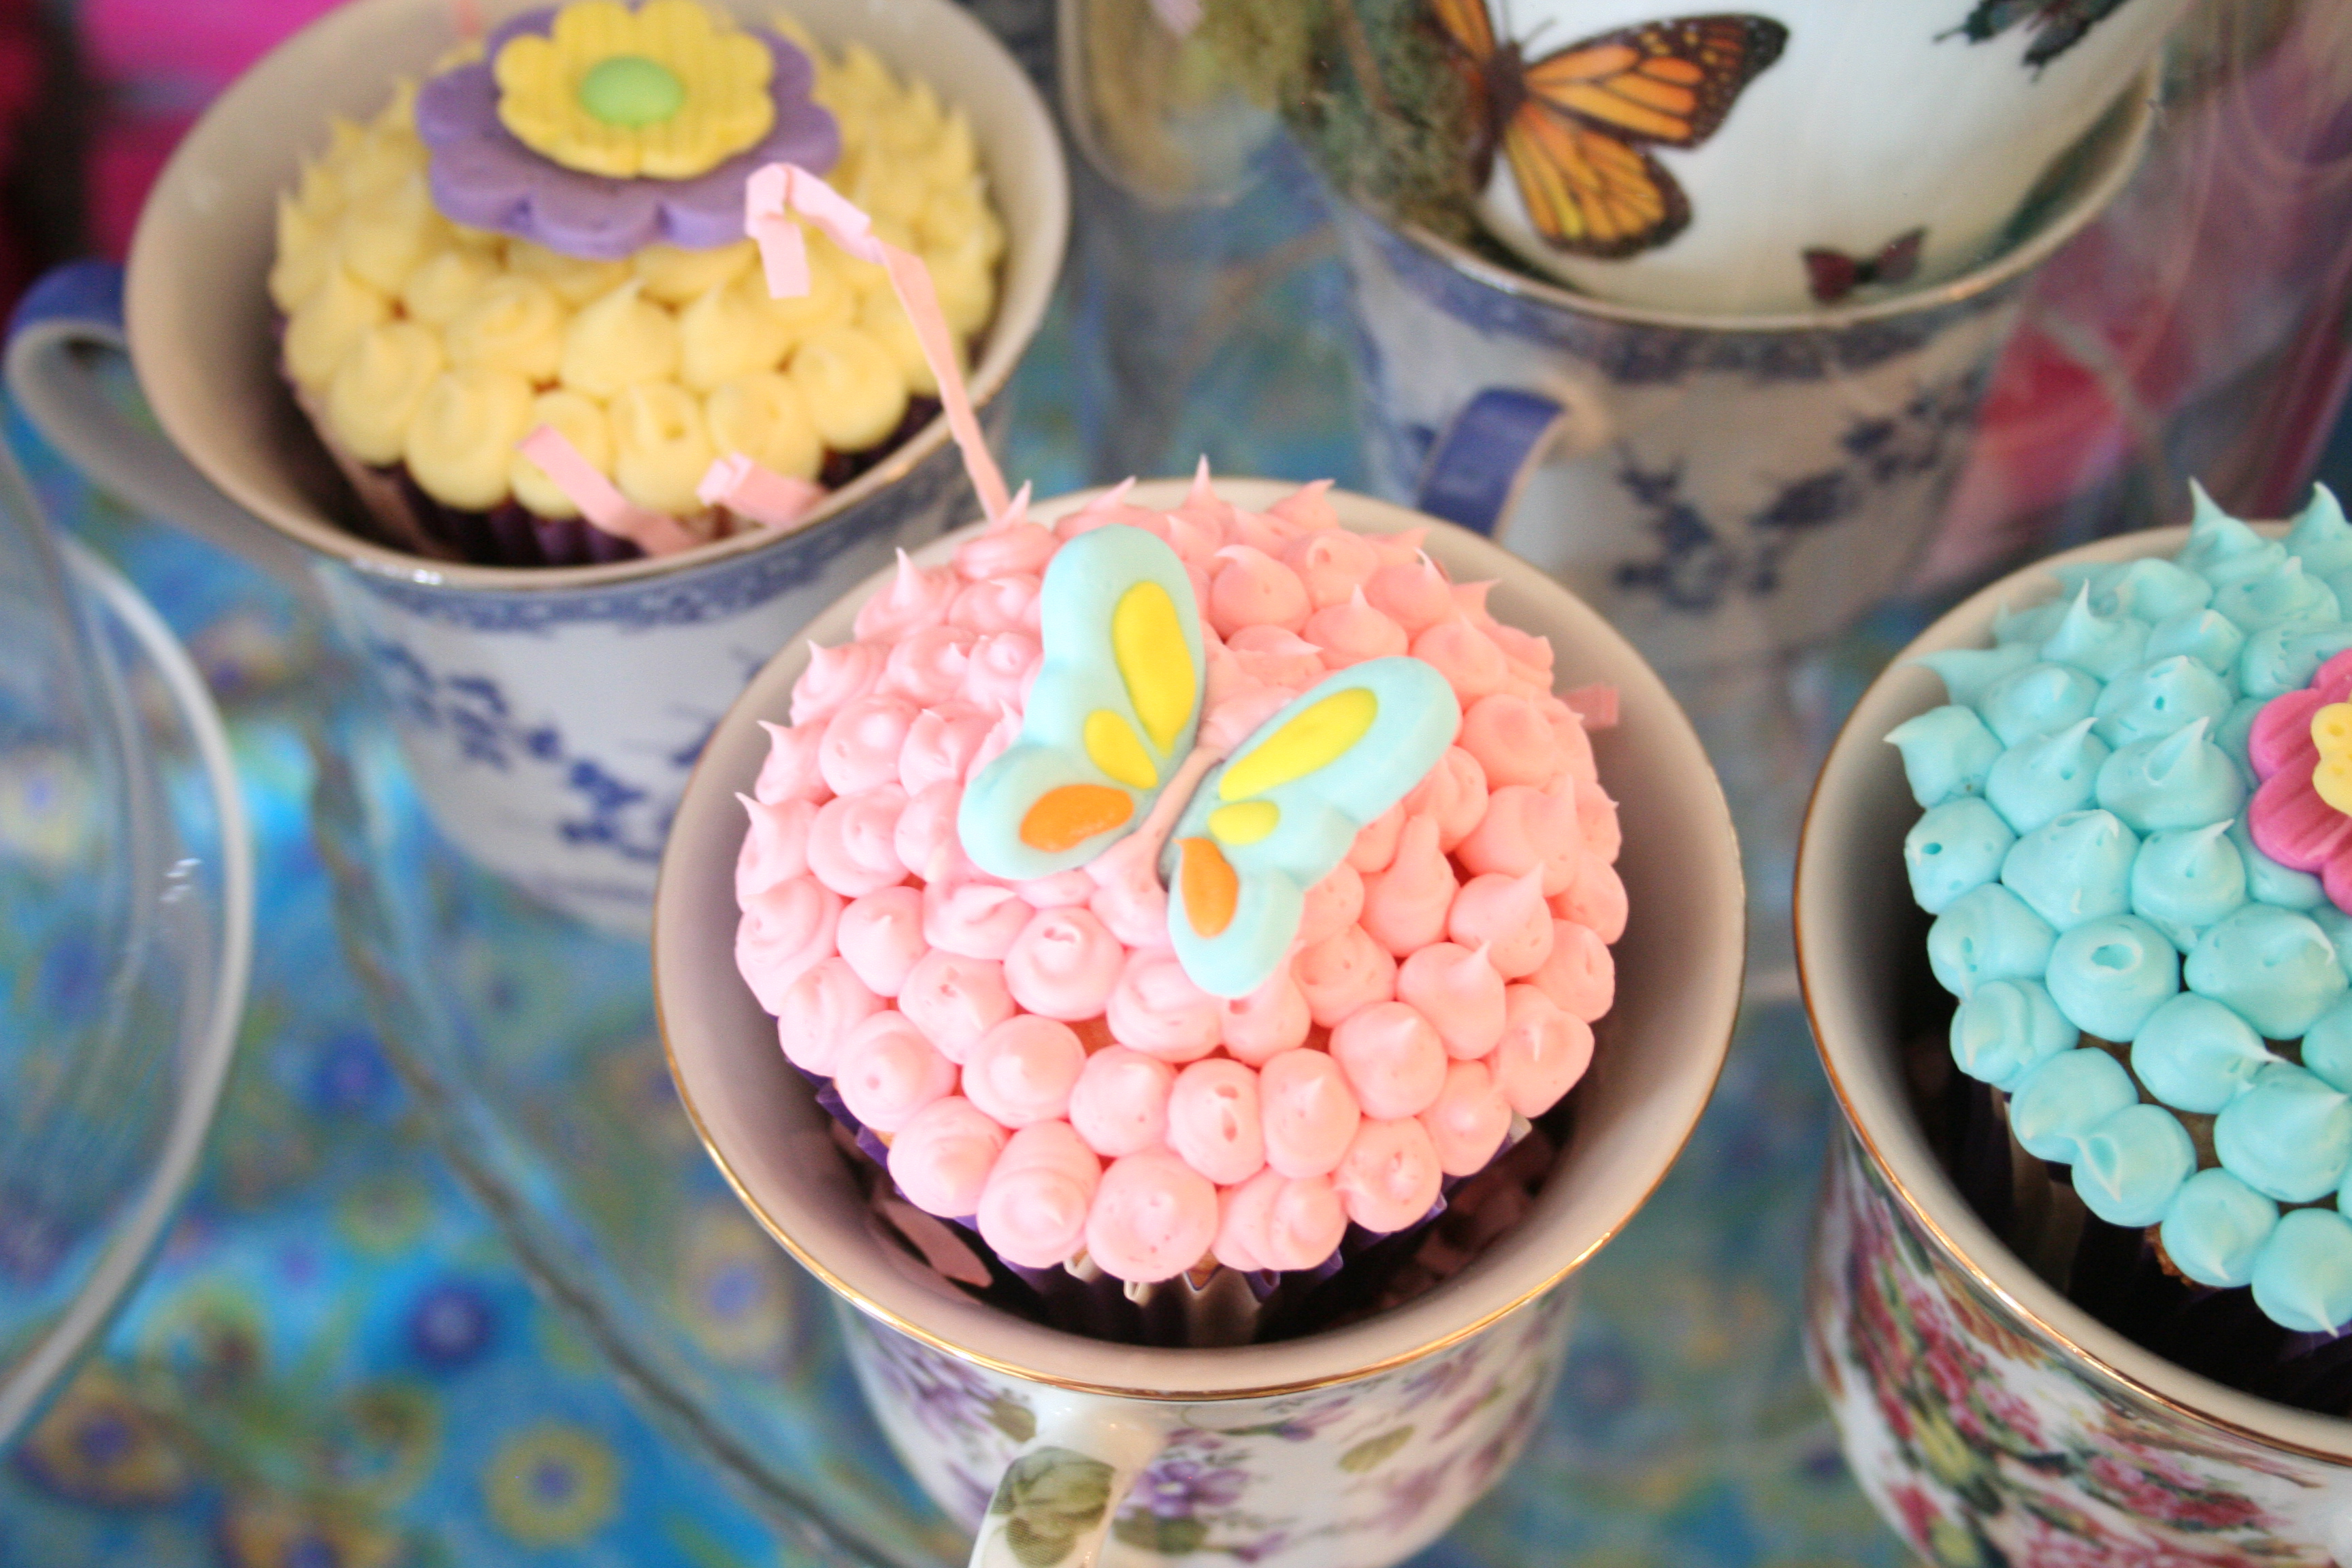 Alice in Wonderland Baby Shower Cupcakes decorated with sugar butterflies